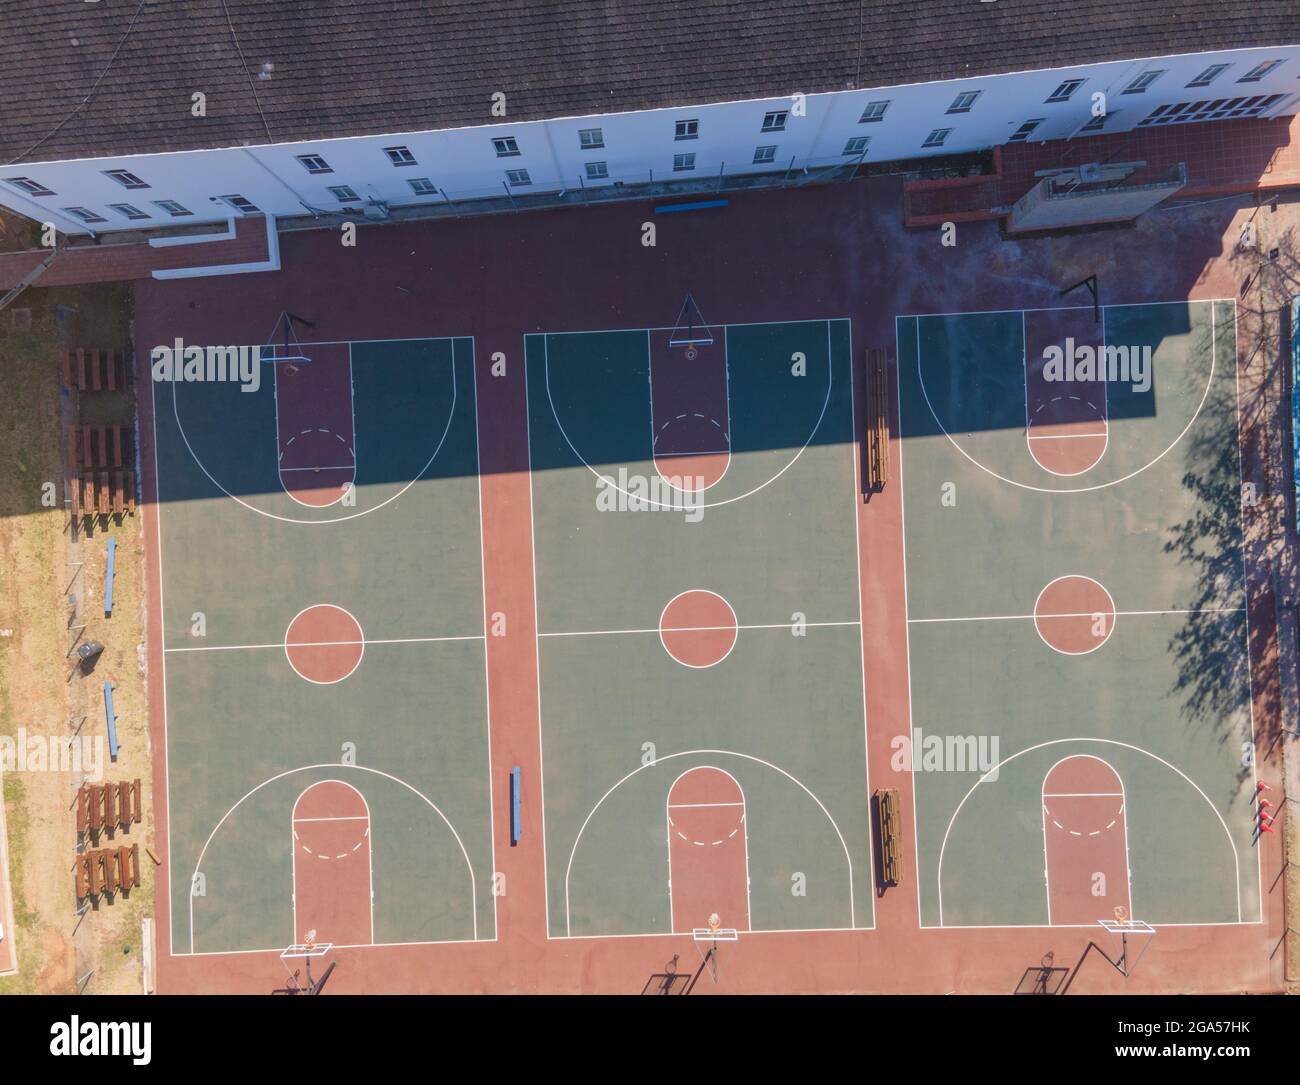 Page 2 - Basketball Ground High Resolution Stock Photography and Images -  Alamy